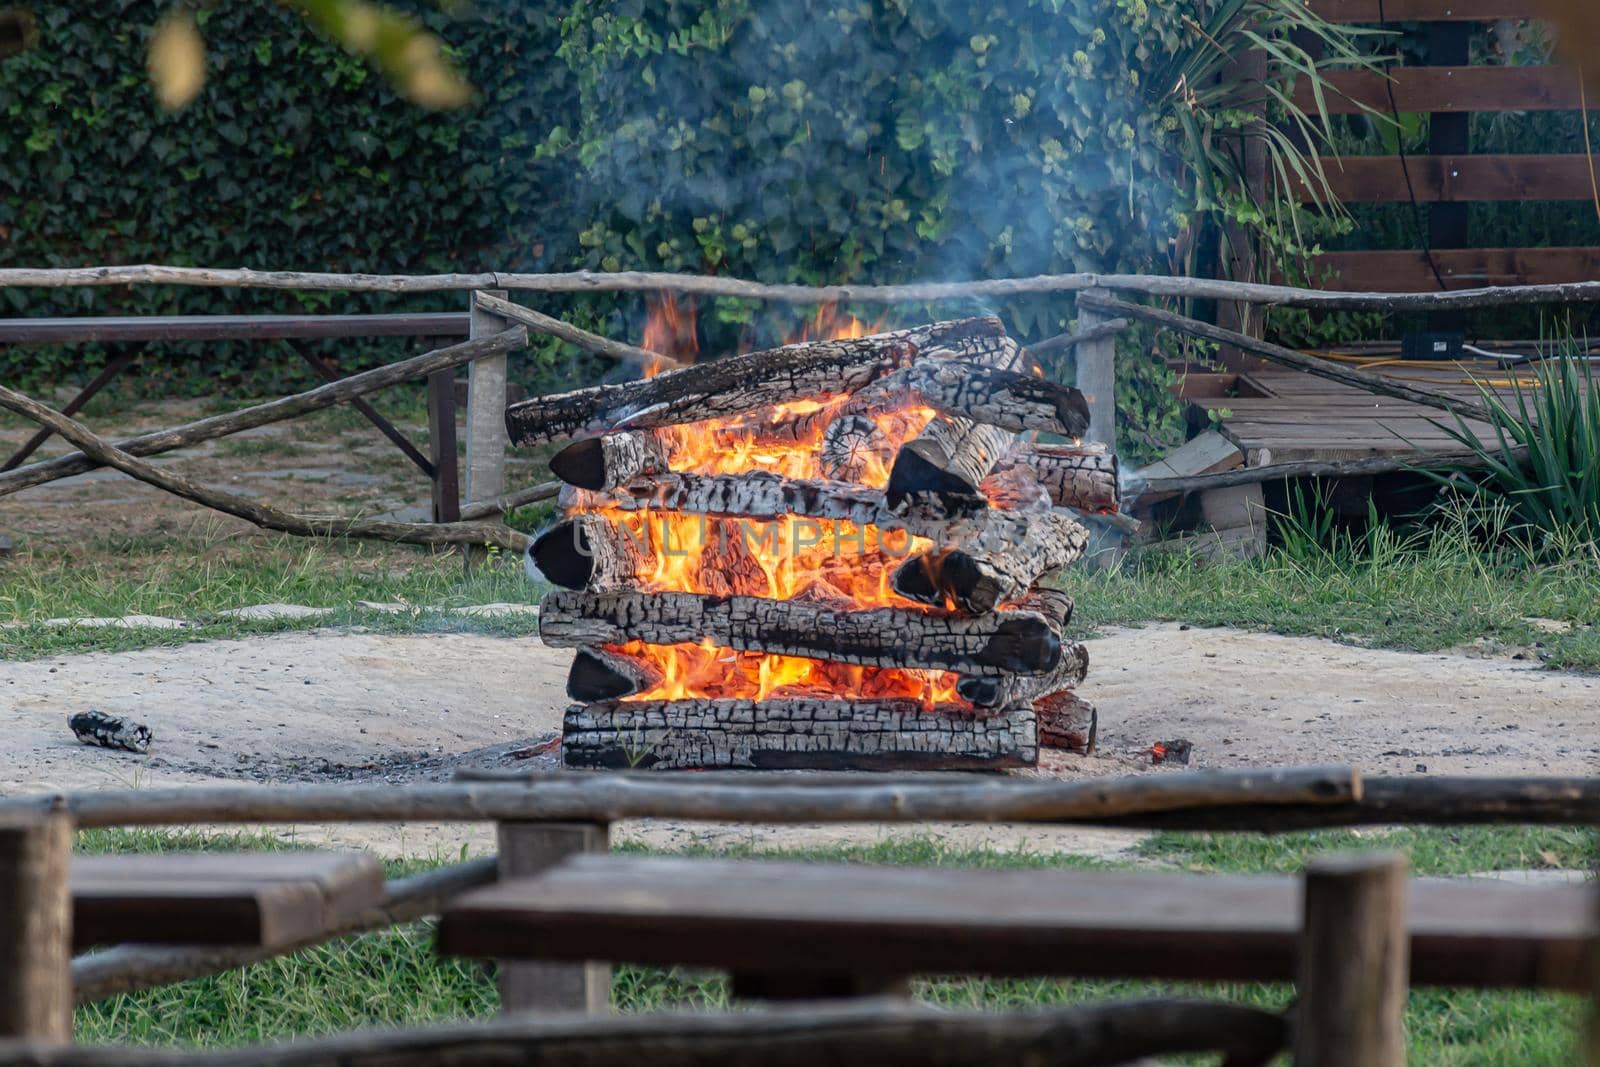 Fire. The burned wood formed coals and a strong heat. Stock photo.
